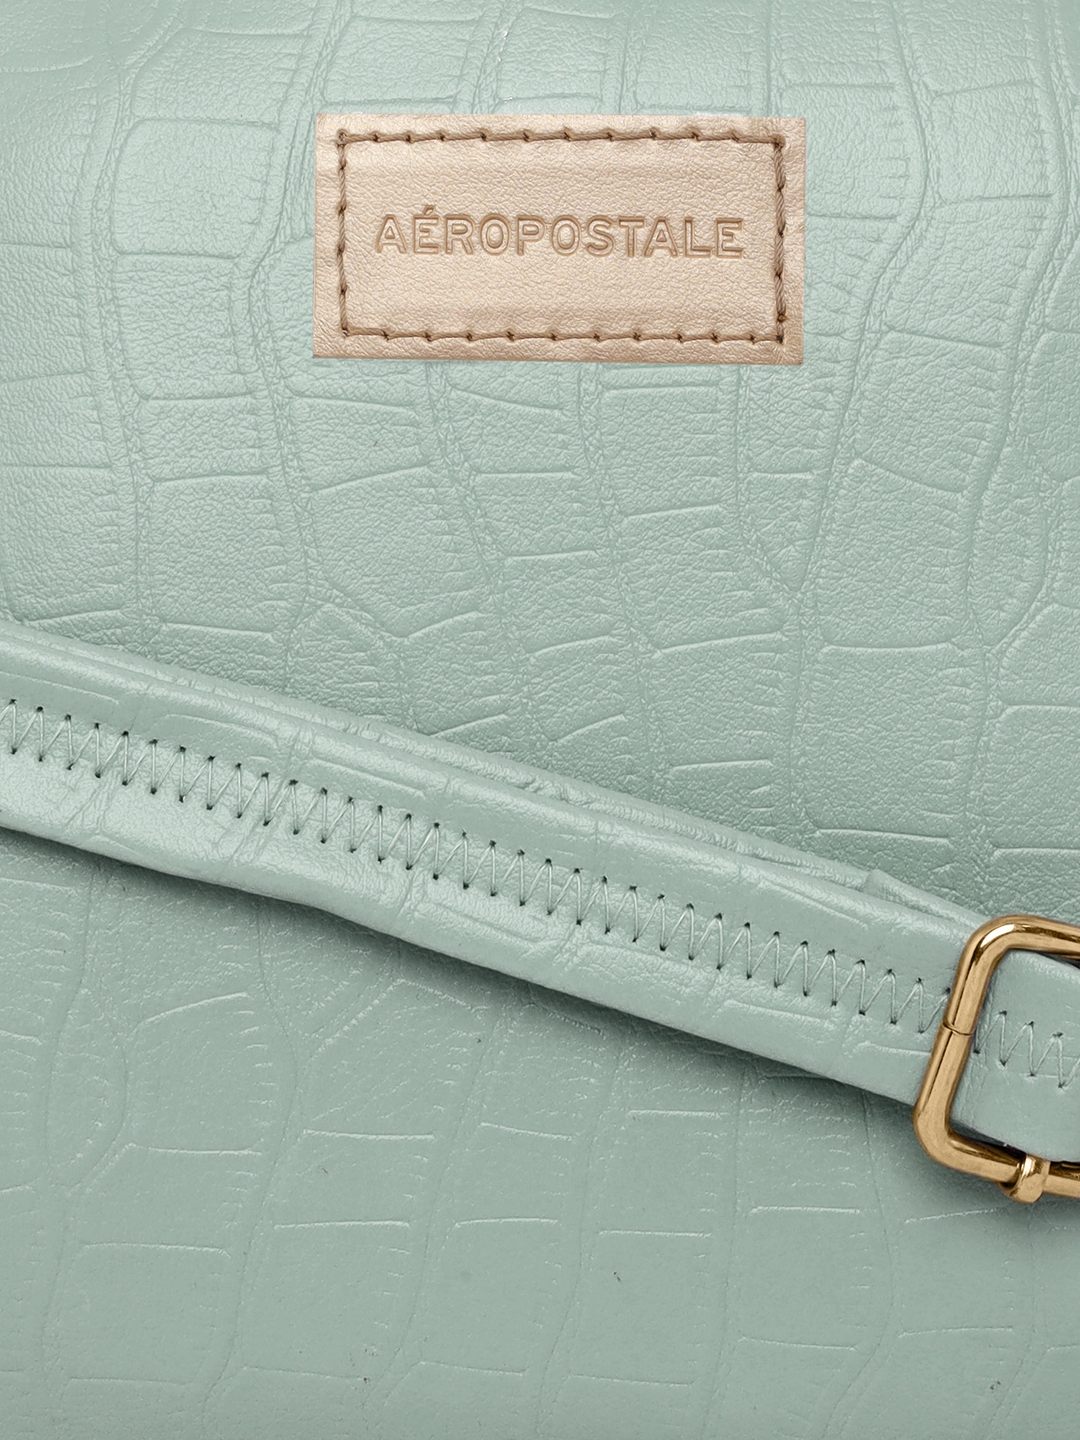 Aeropostale | Aeropostale Textured Kylie PU Sling Bag with non-detachable strap (Green) 5